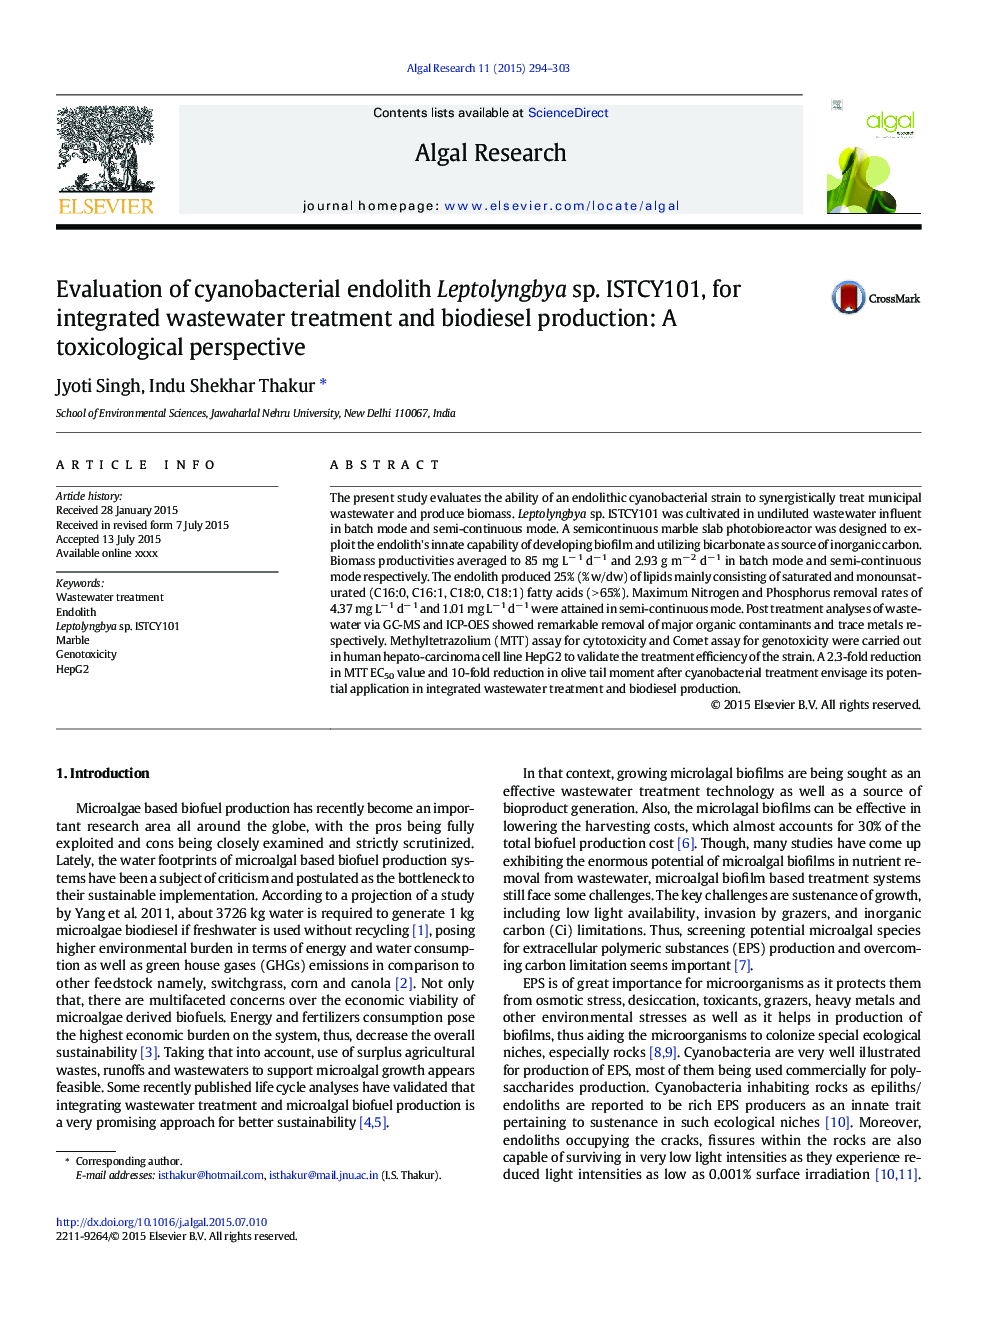 Evaluation of cyanobacterial endolith Leptolyngbya sp. ISTCY101, for integrated wastewater treatment and biodiesel production: A toxicological perspective